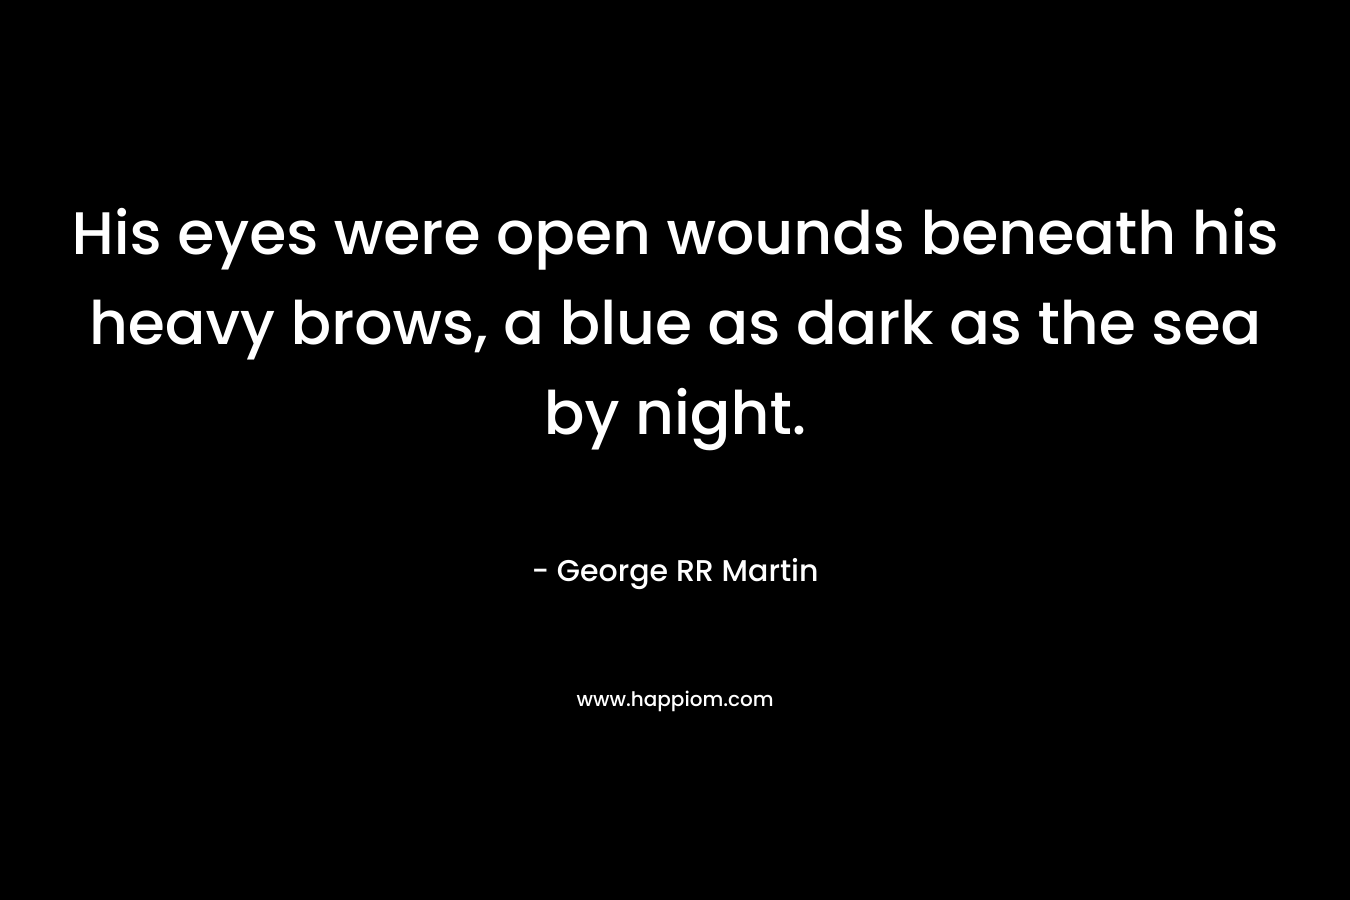 His eyes were open wounds beneath his heavy brows, a blue as dark as the sea by night. – George RR Martin